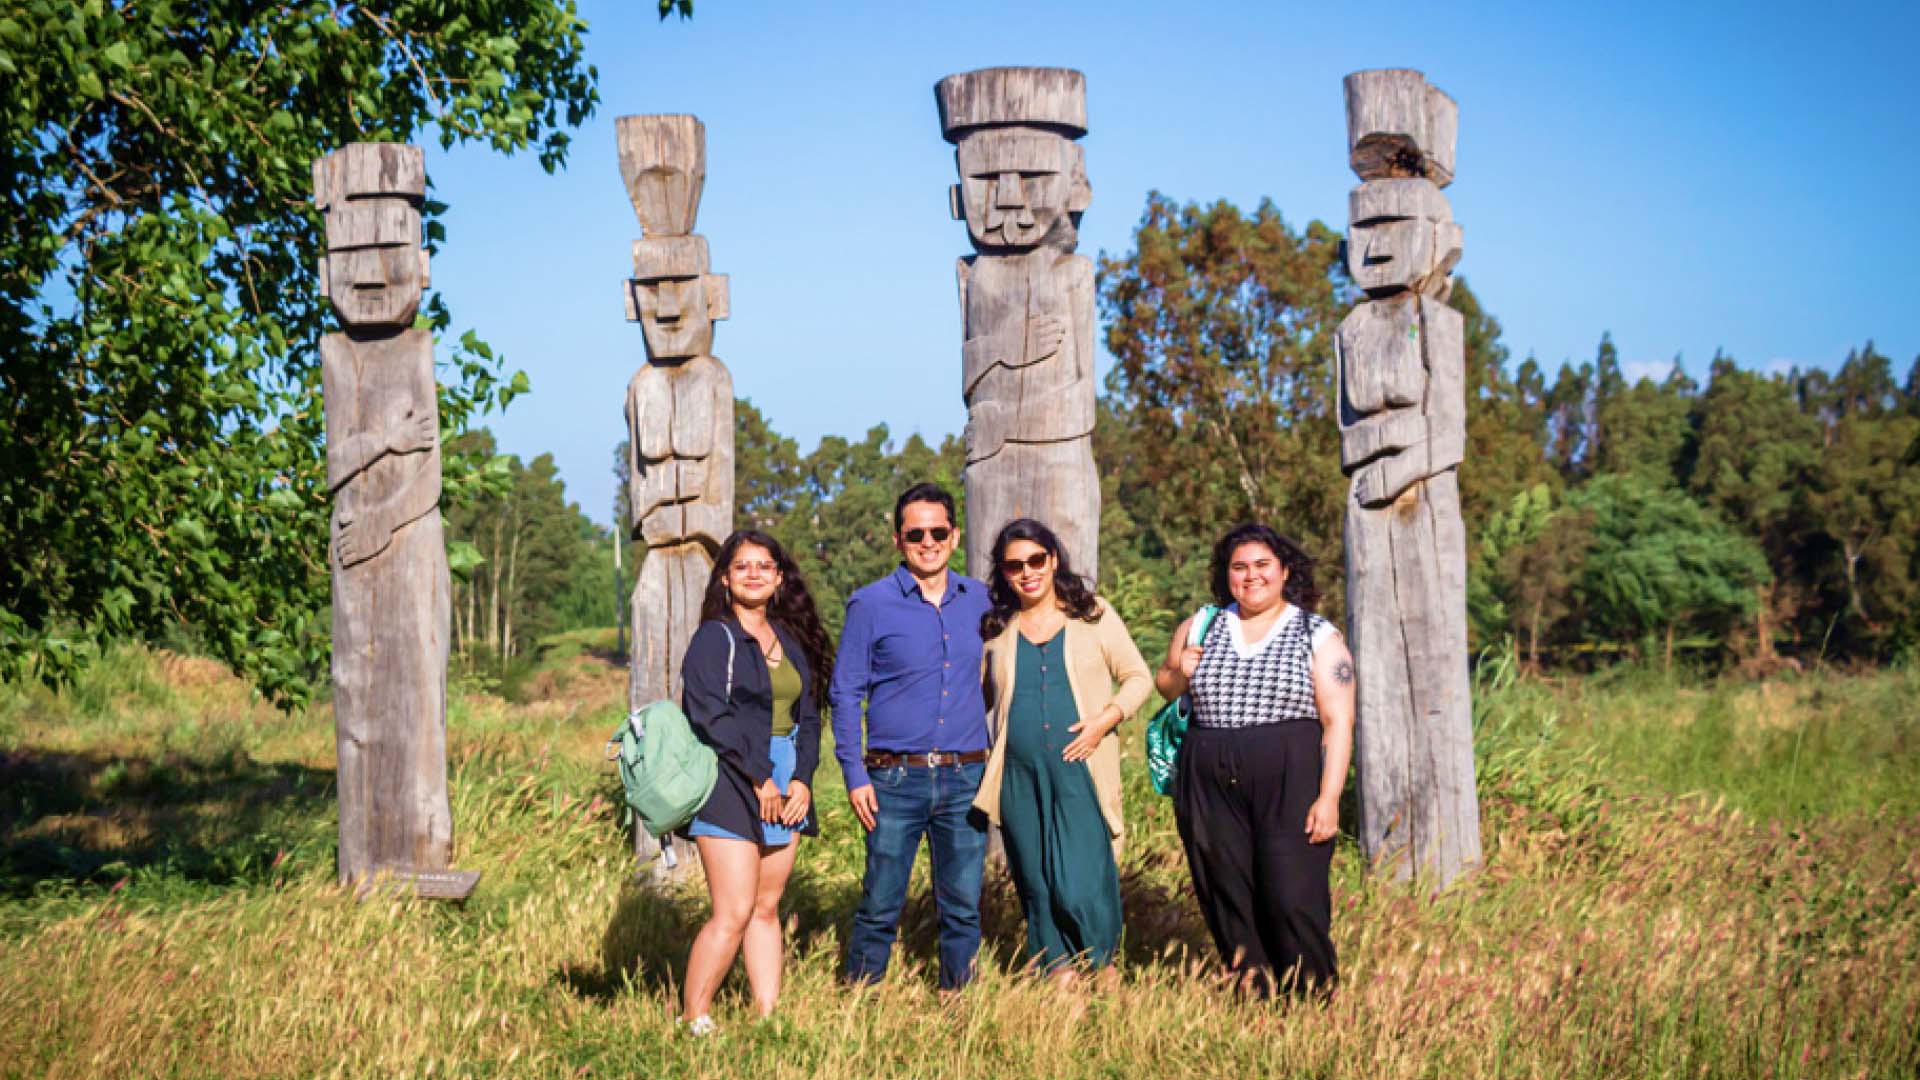 Four members of the Chilean research team in a grassy field with trees all around smiling while posing in front of four tall, stone-carved statues